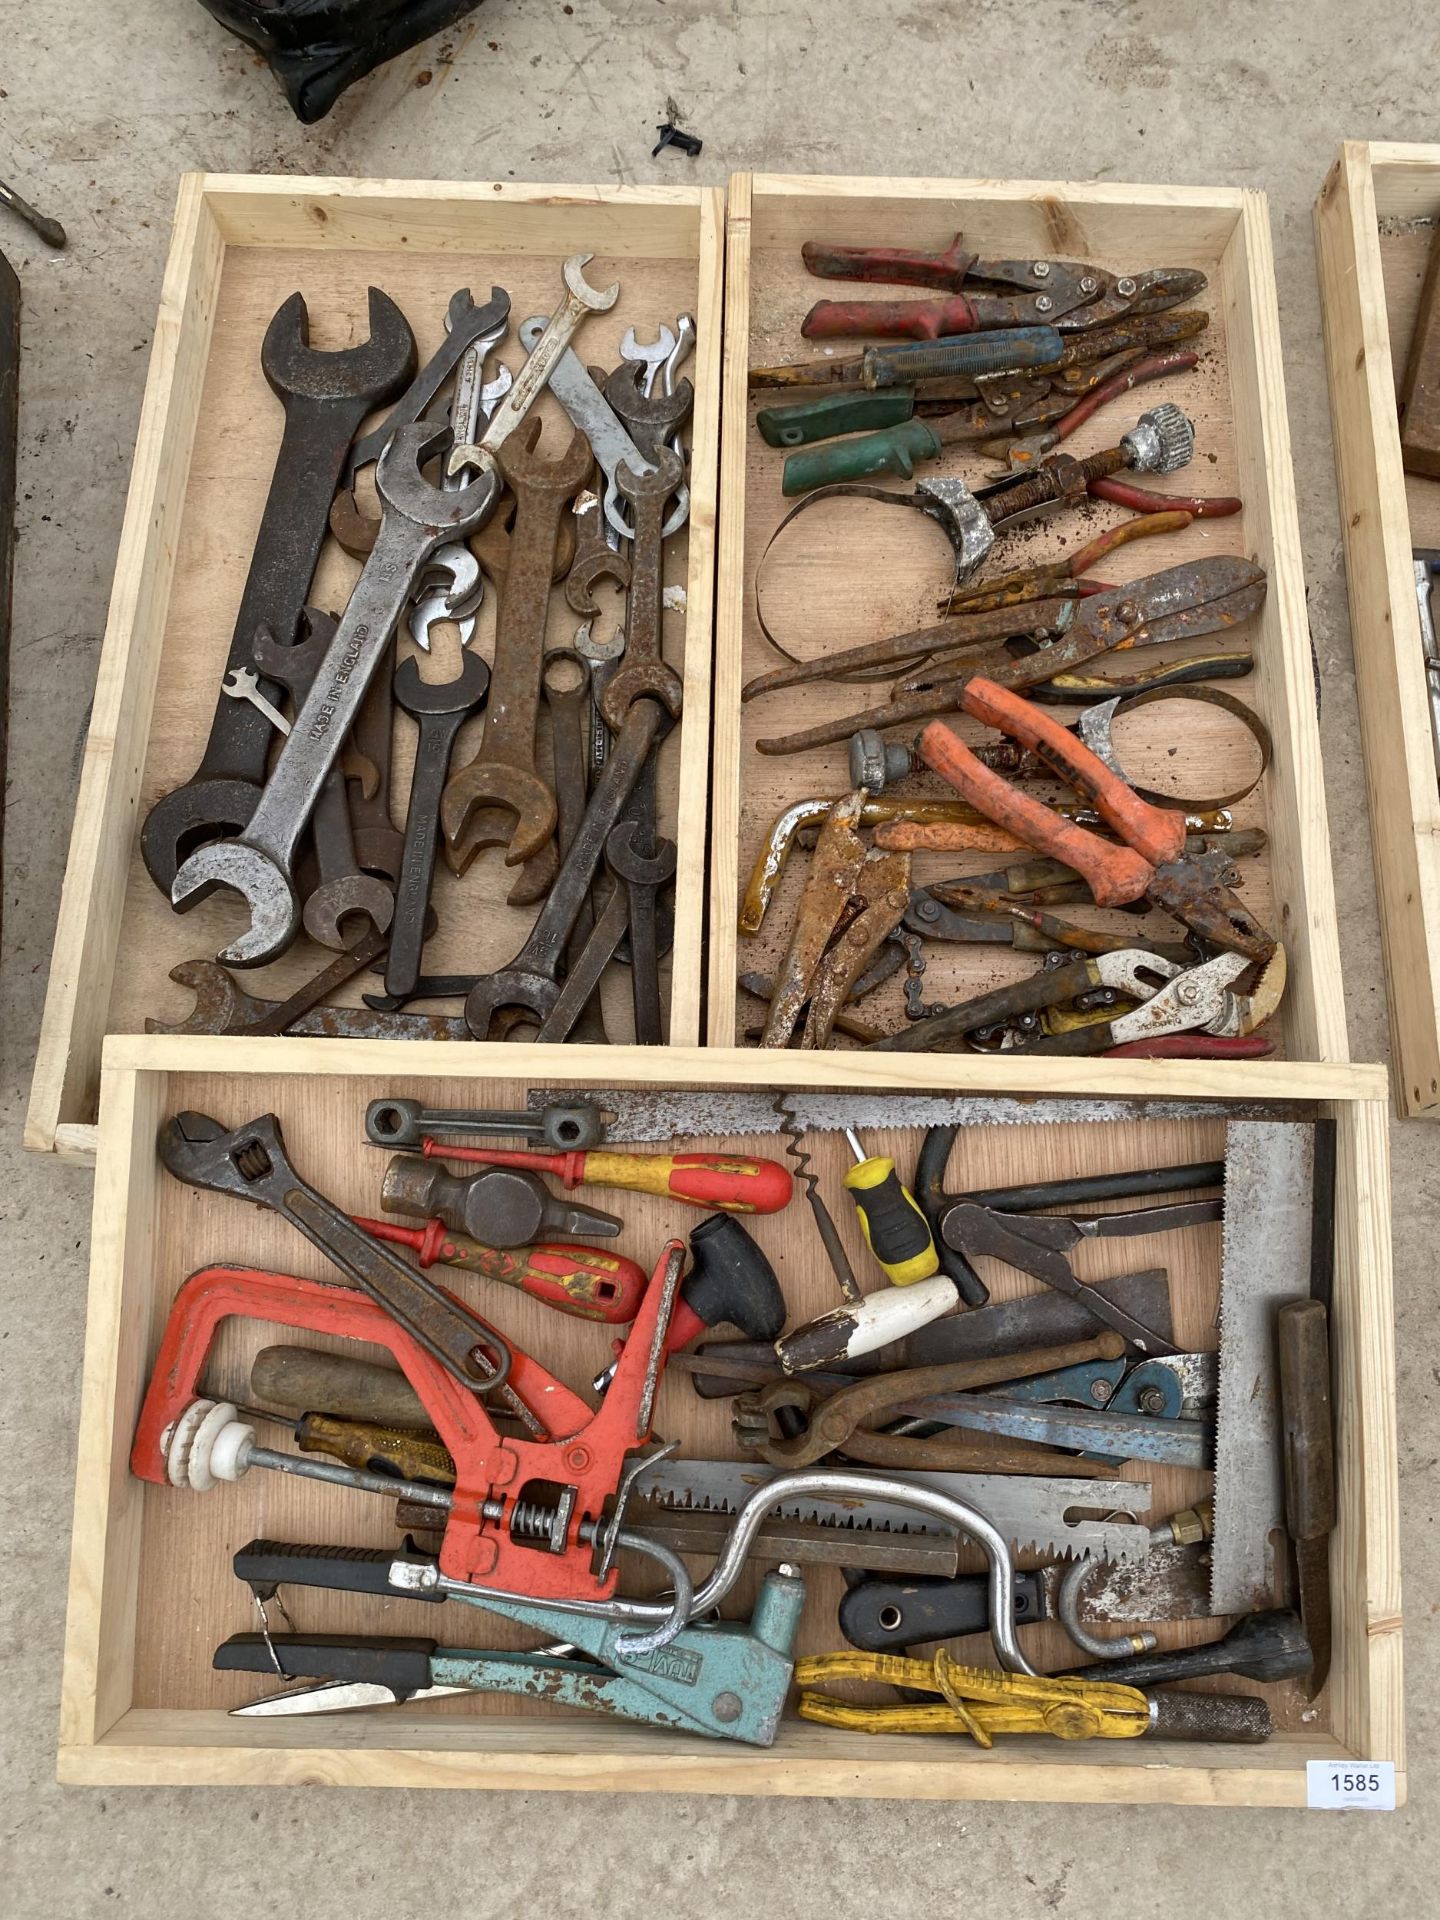 A LARGE QUANTITY OF TOOLS TO INCLUDE SPANNERS, PLIERS AND A POT RIVOTER ETC